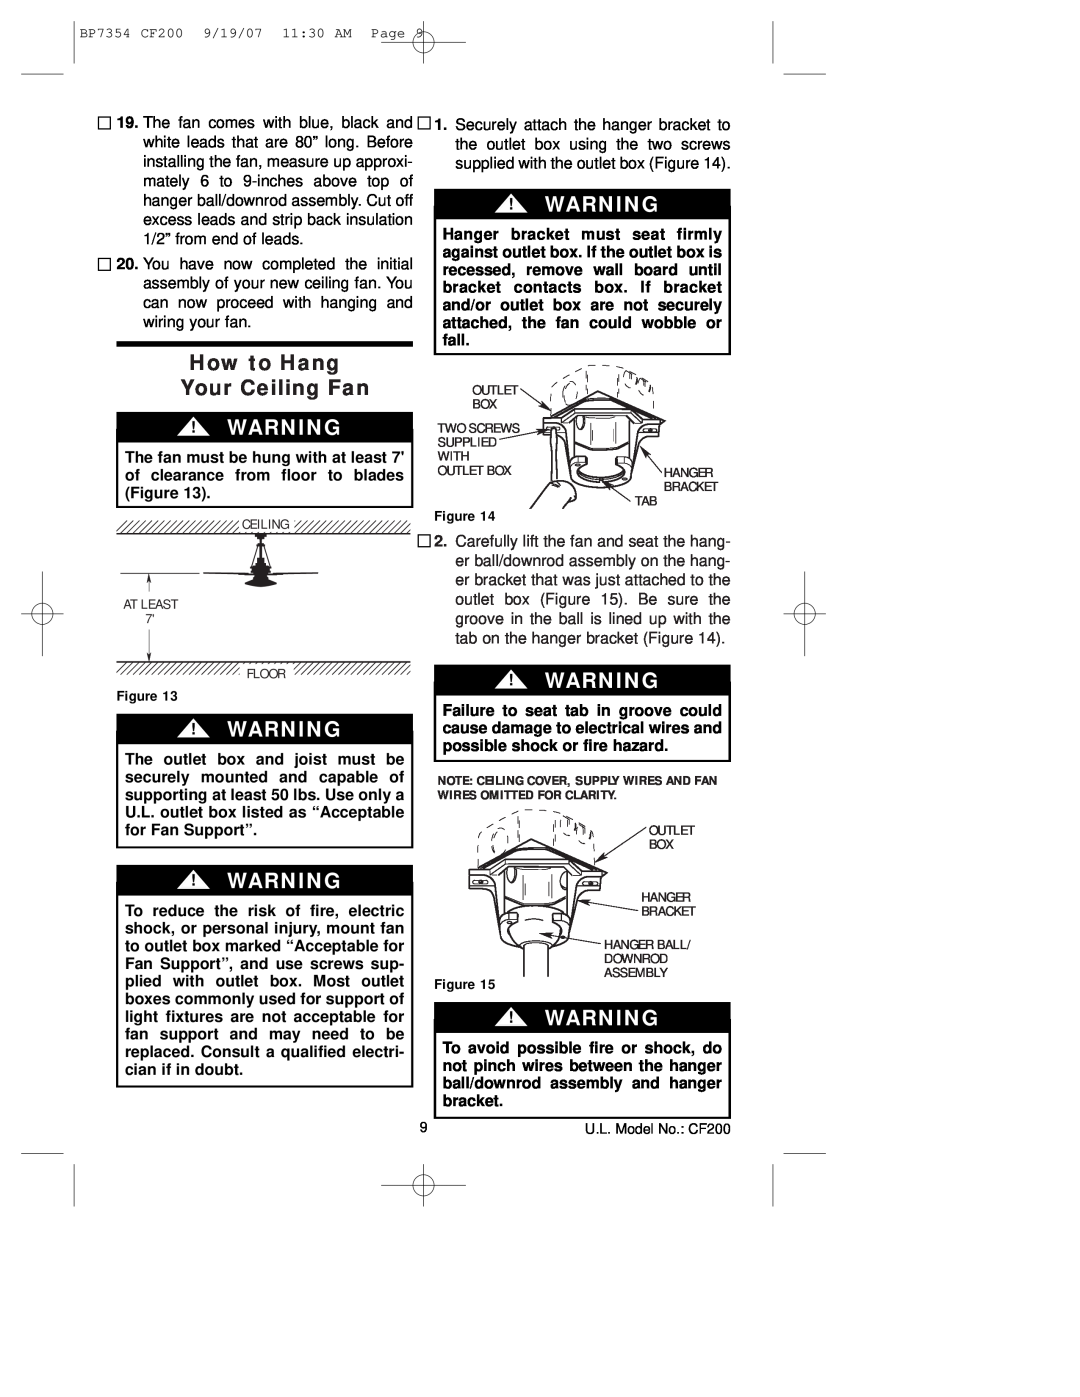 Emerson CF200n100 owner manual How to Hang Your Ceiling Fan 